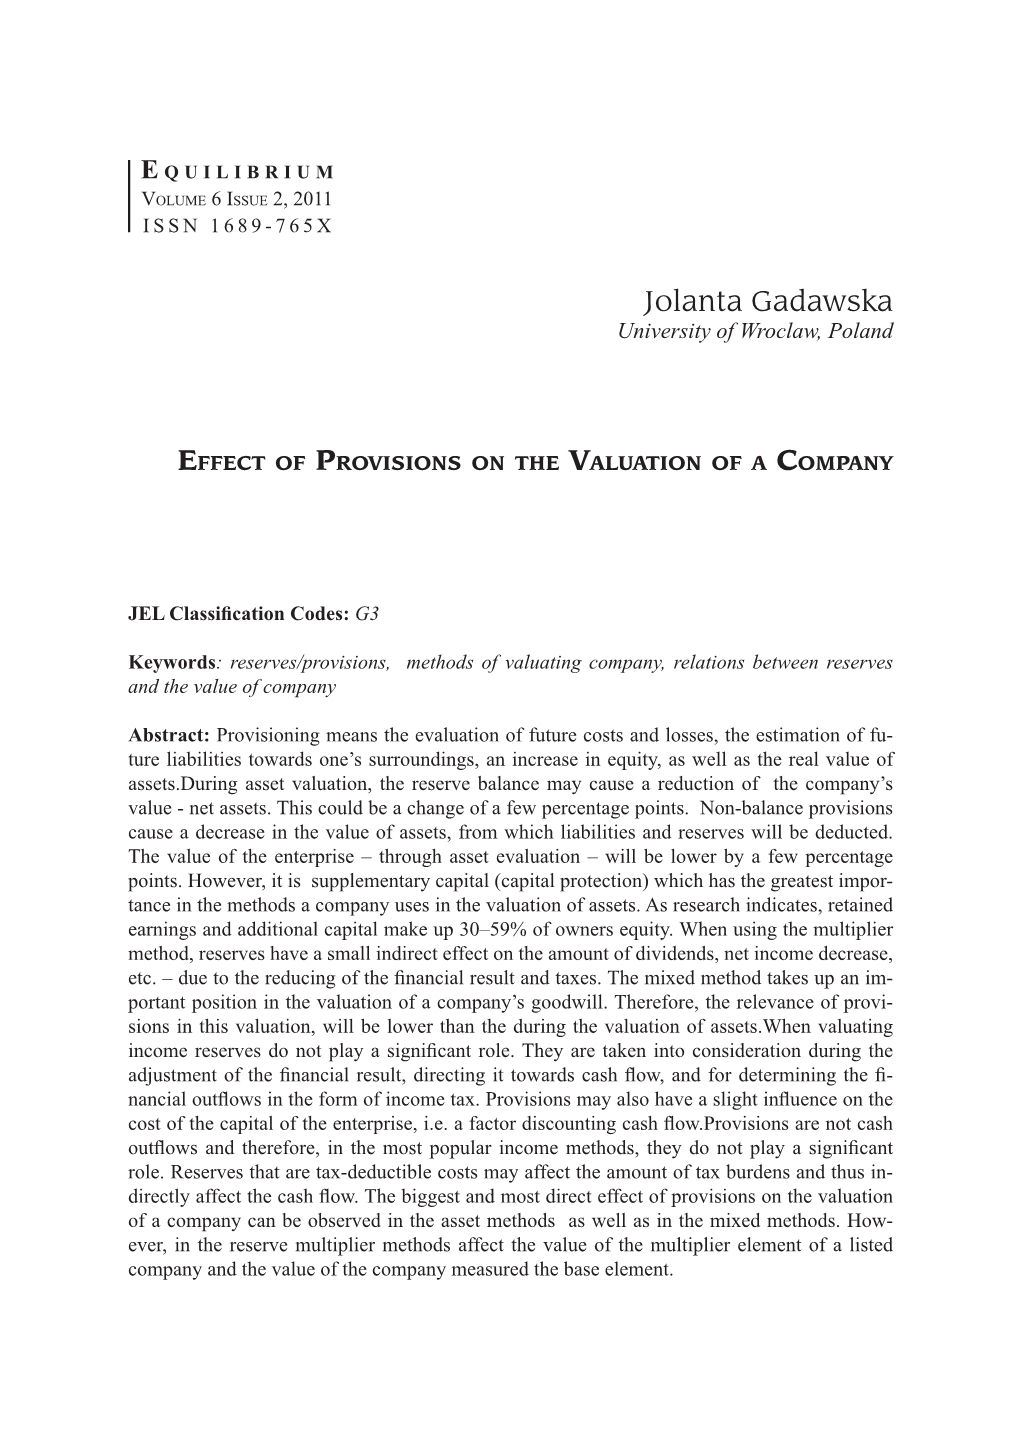 Effect of Provision on the Valuation of a Campany